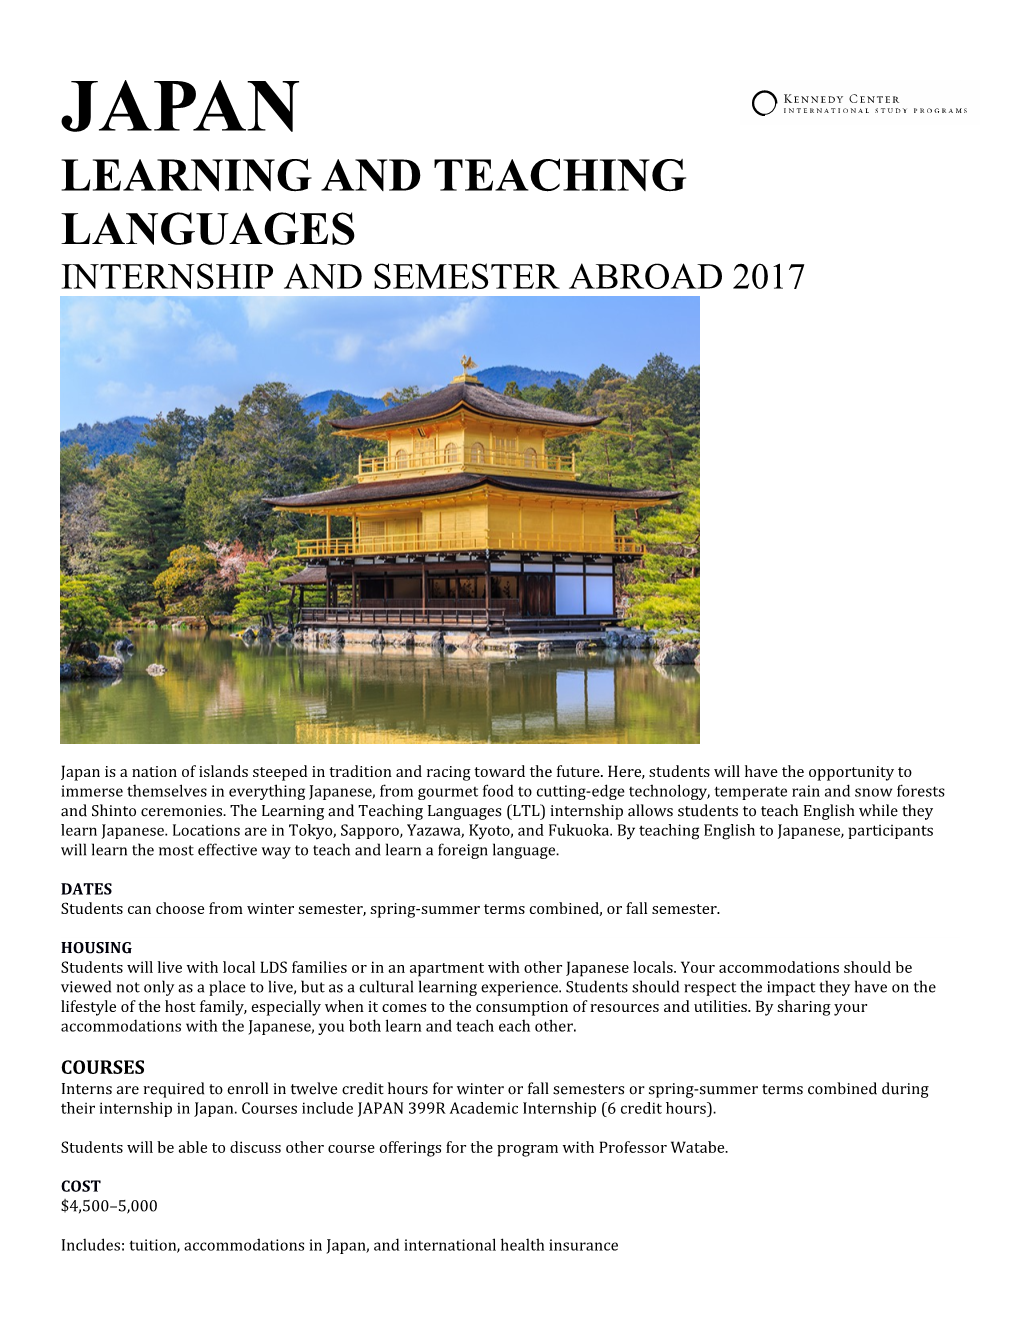 Learning and Teaching Languages